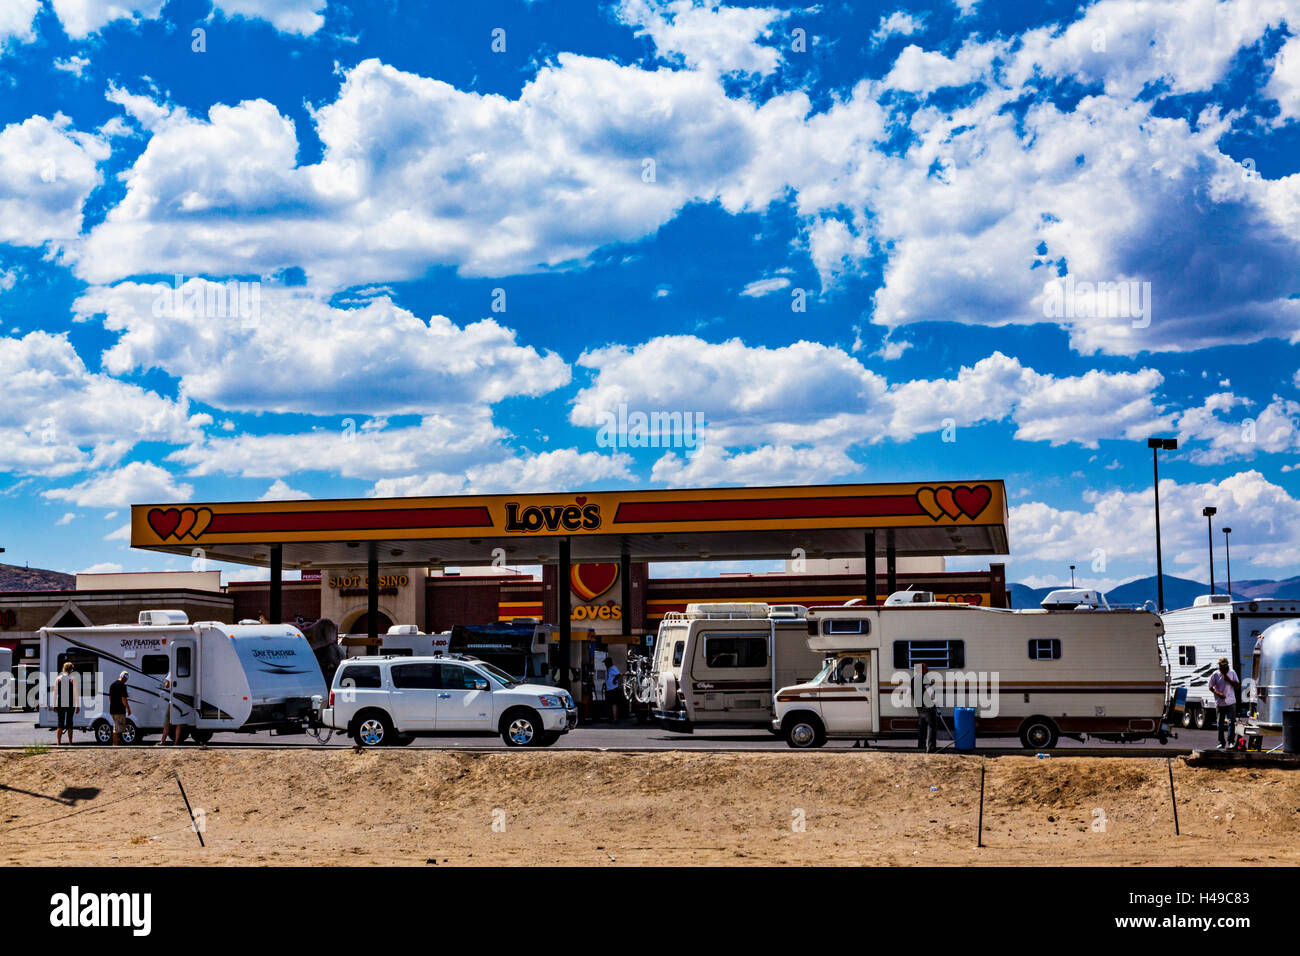 Burners on their way to Burning man stop in Fernley Nevada to stock up for the week in Black Rock City Stock Photo